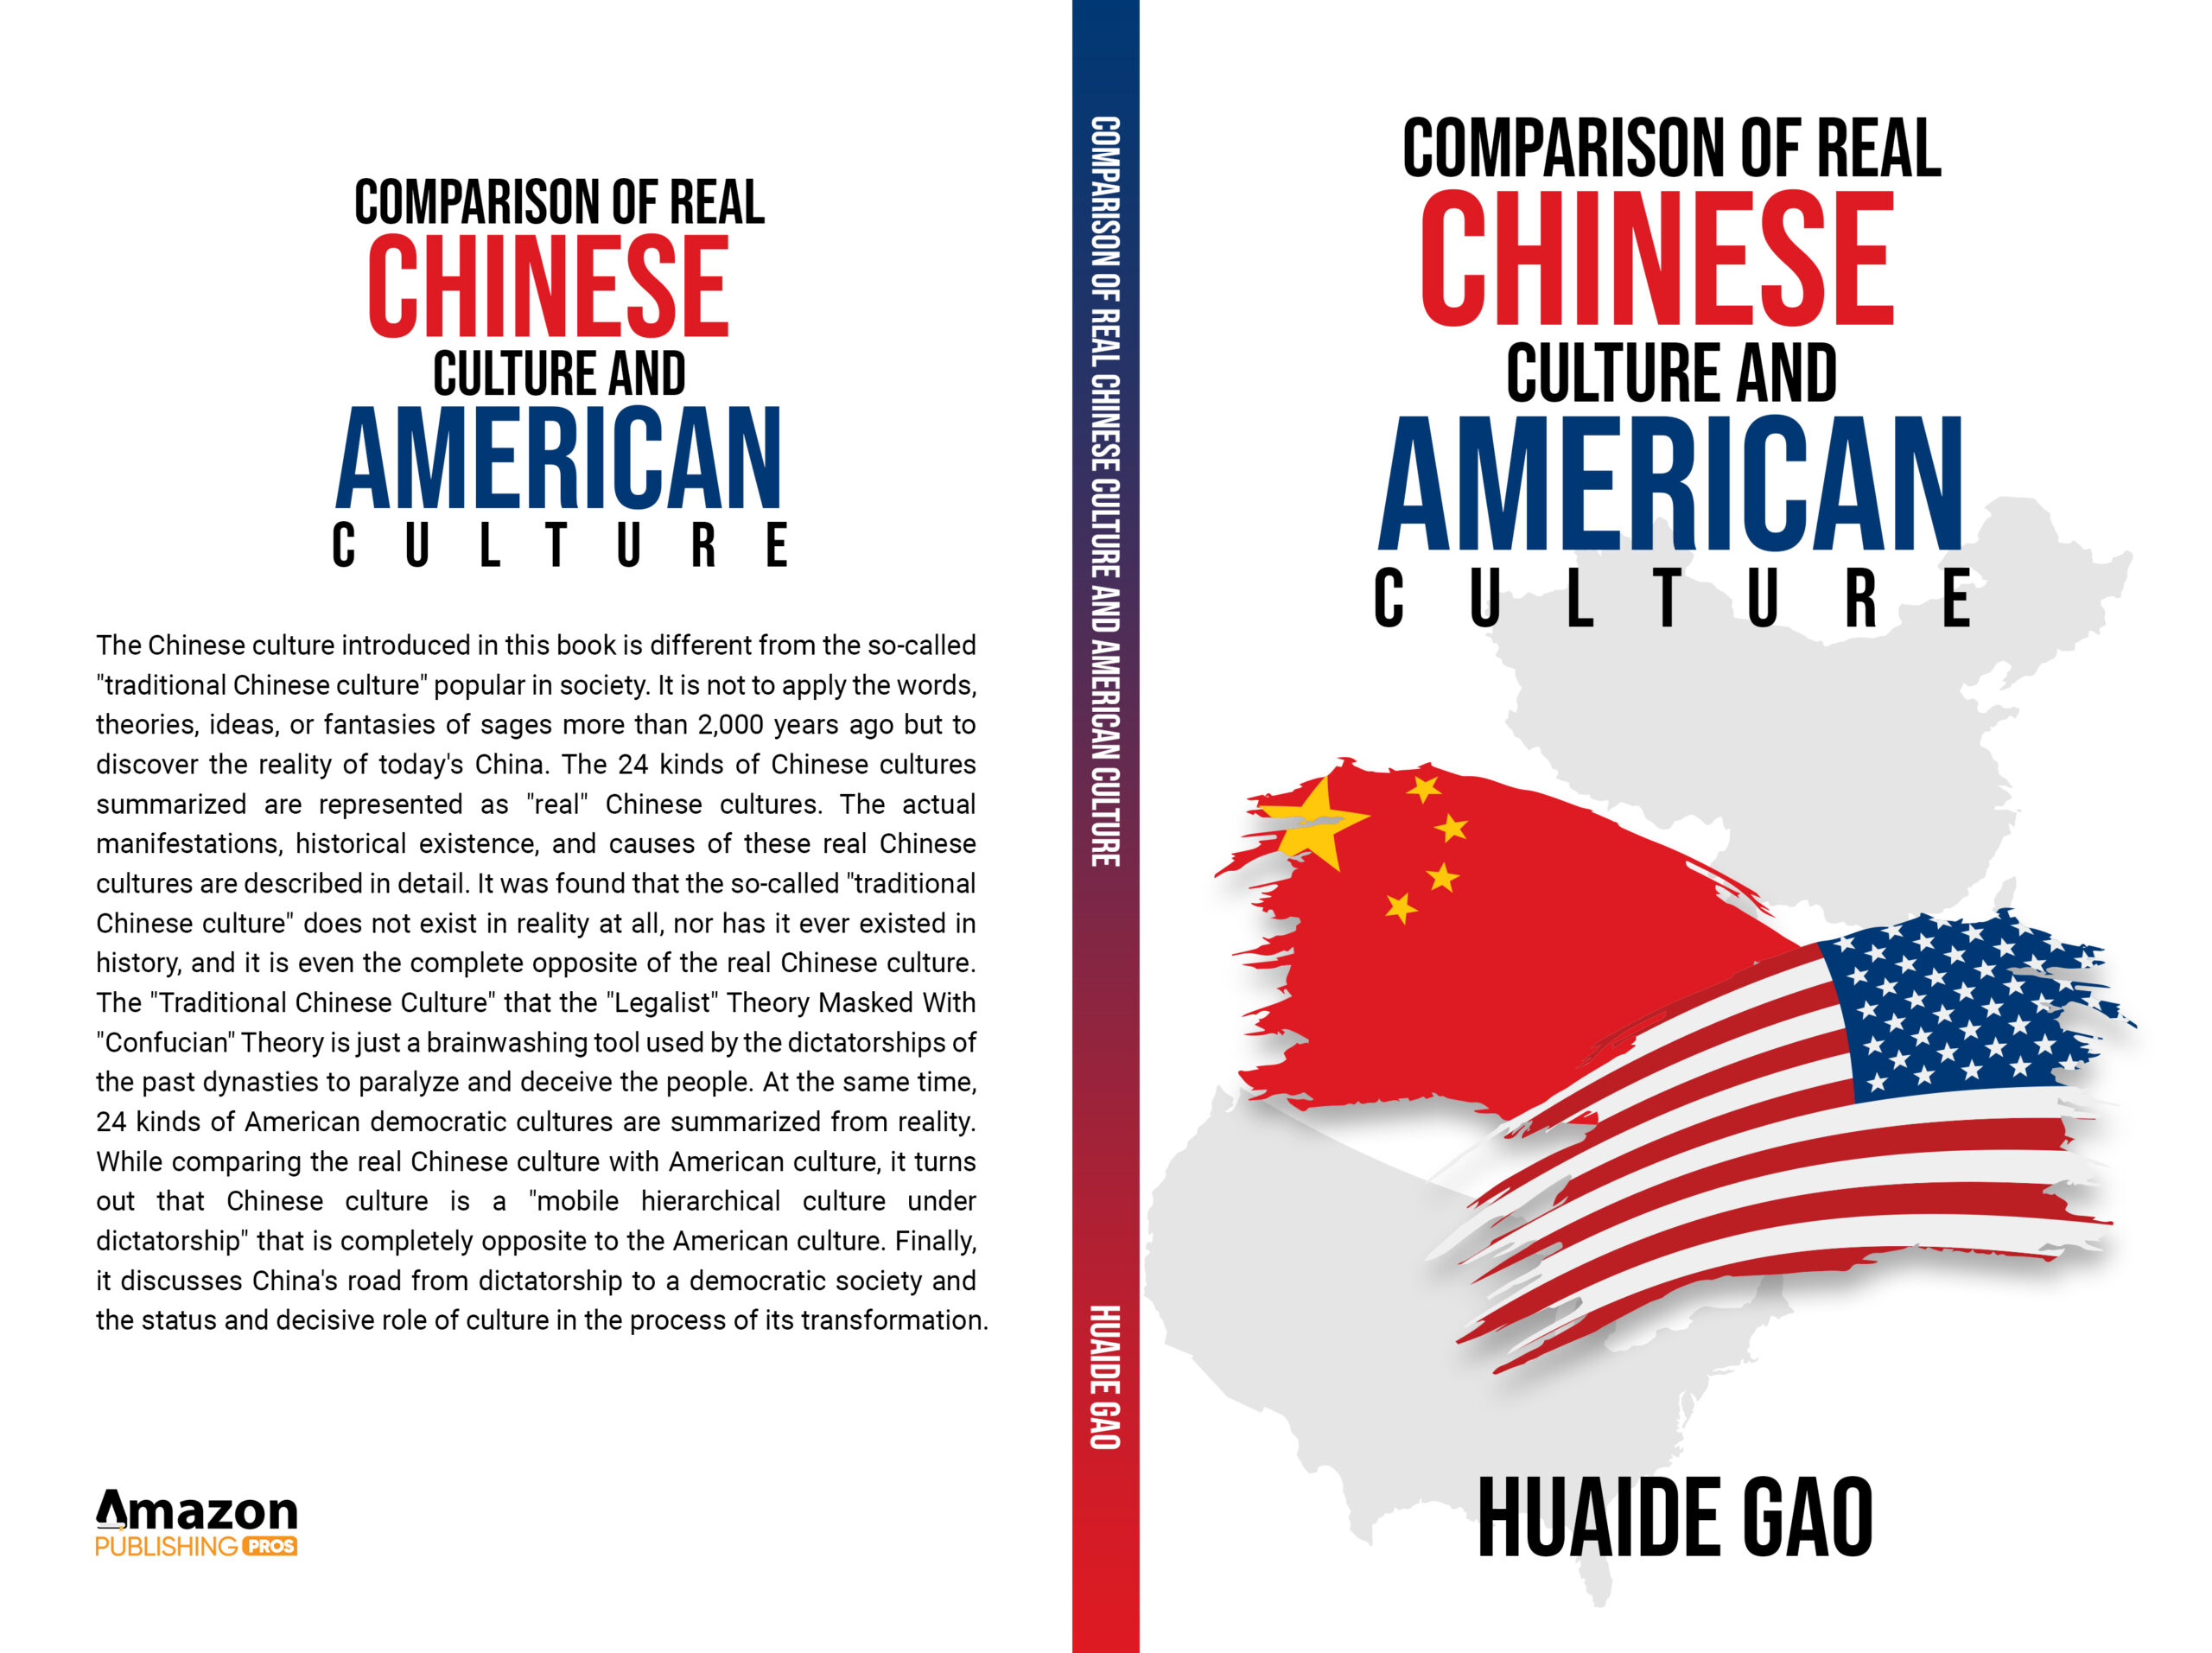 Huaidi Gao Compares The Chinese Culture With The American Culture 13